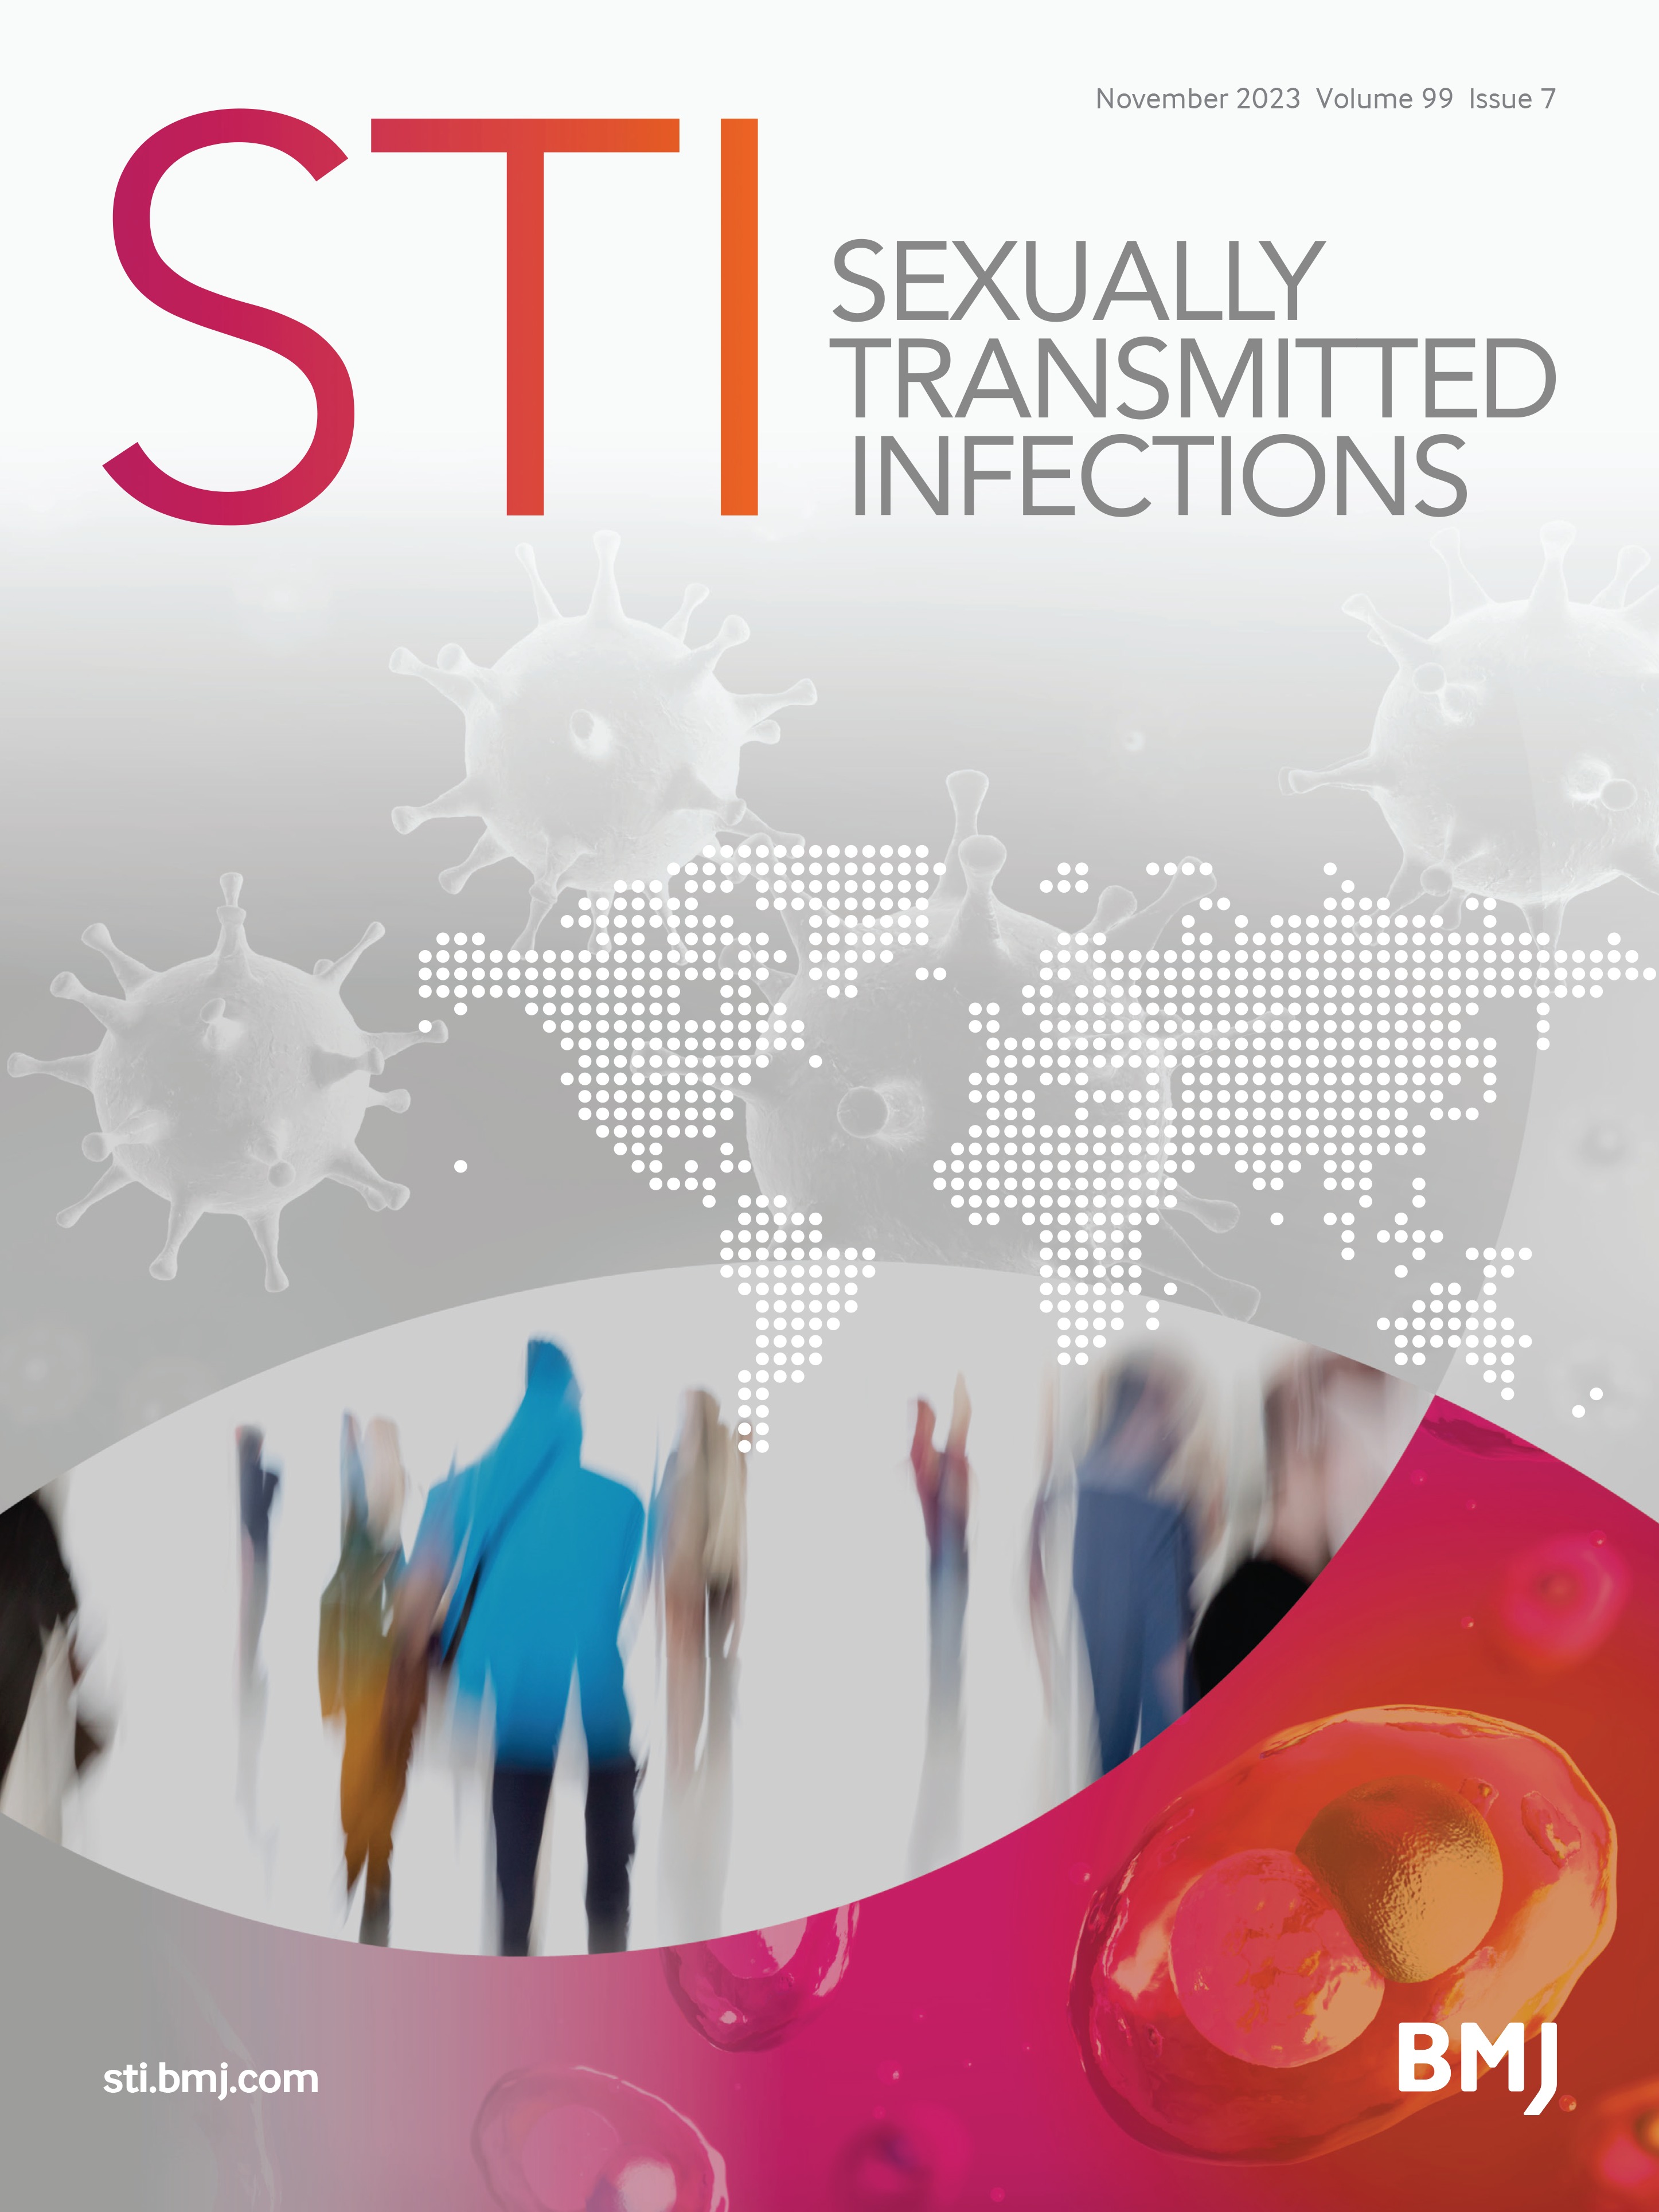 Effect of COVID-19 pandemic restrictions on chlamydia and gonorrhoea notifications and testing in Queensland, Australia: an interrupted time series analysis